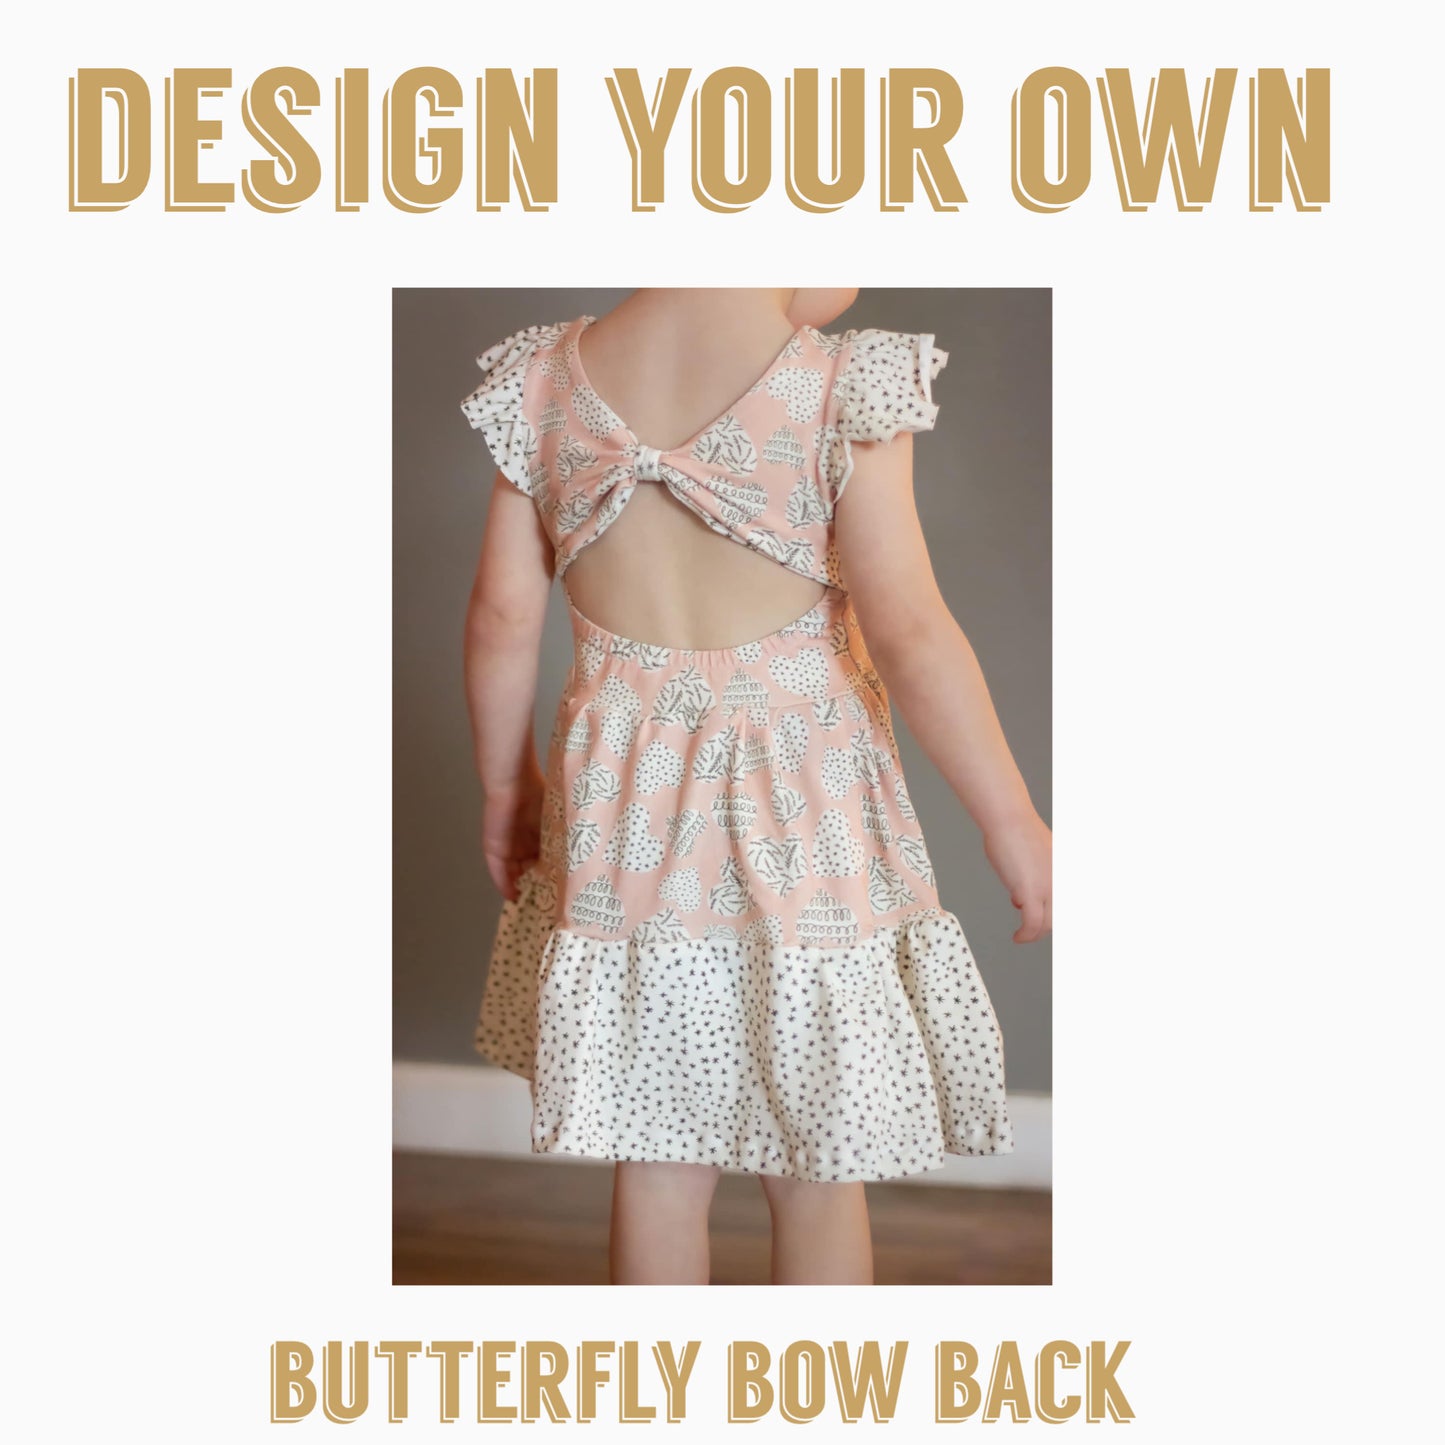 Design your own | Butterfly bow back dress